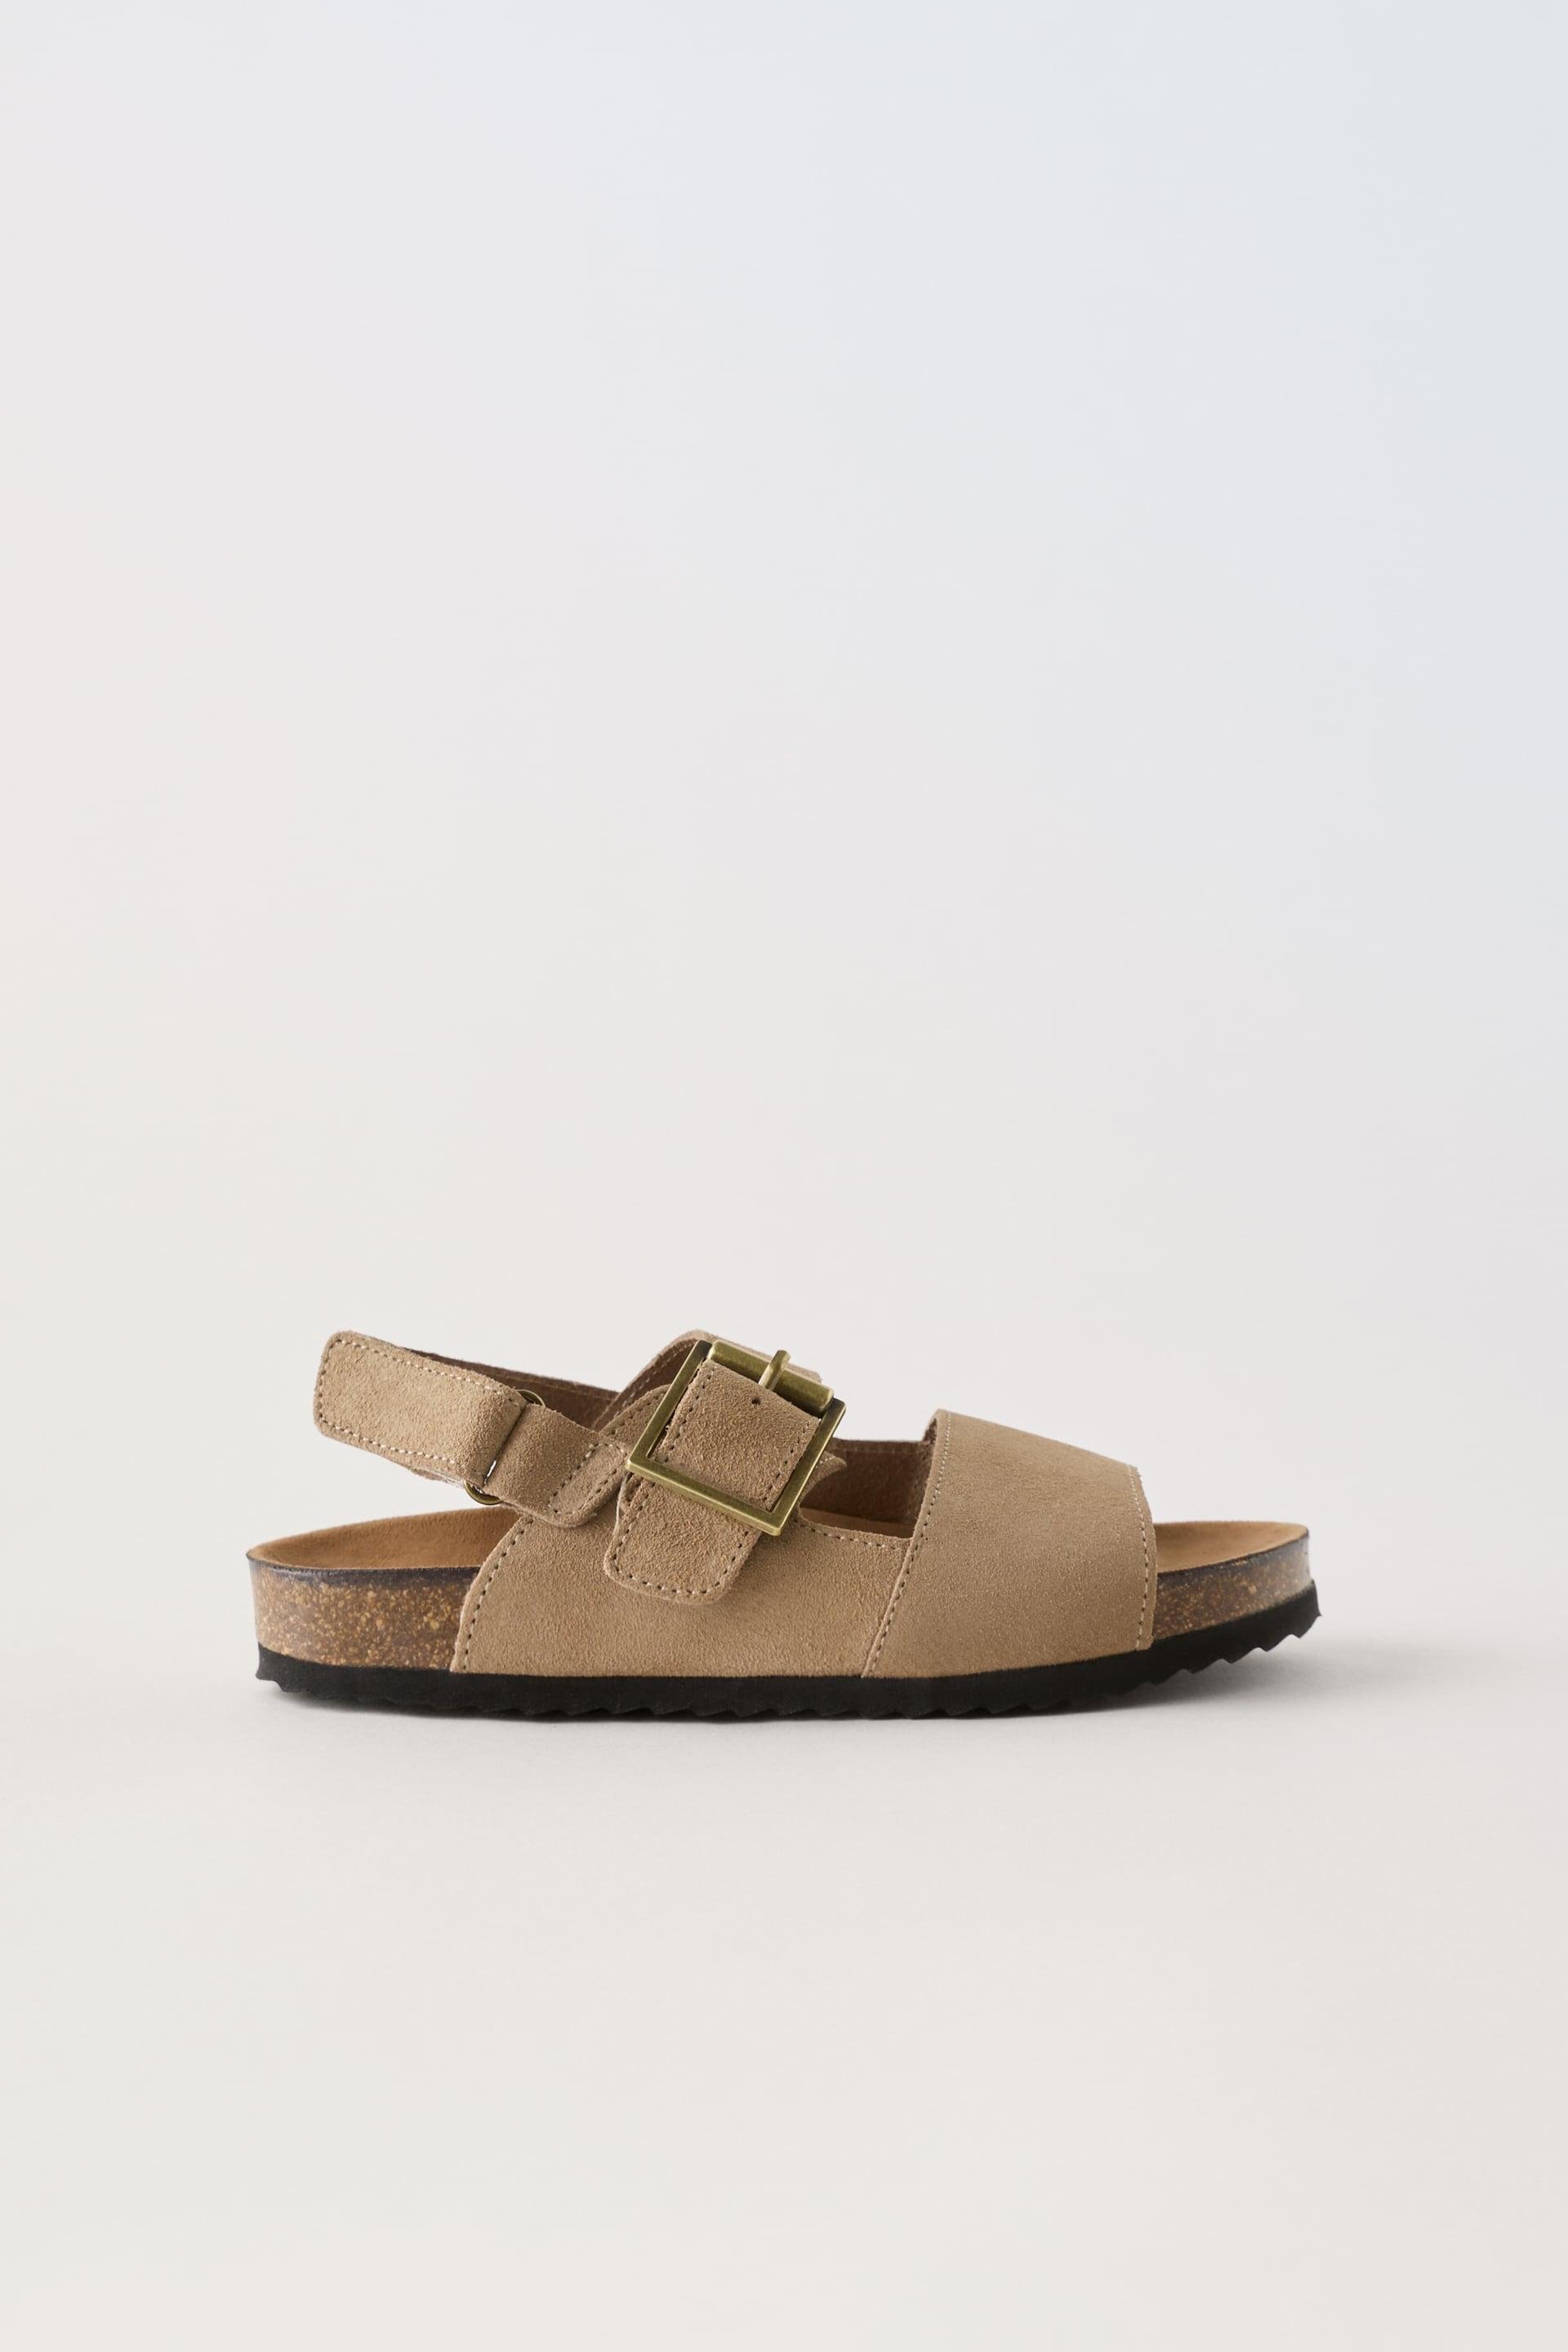 TWO STRAP SUEDE SANDALS by ZARA